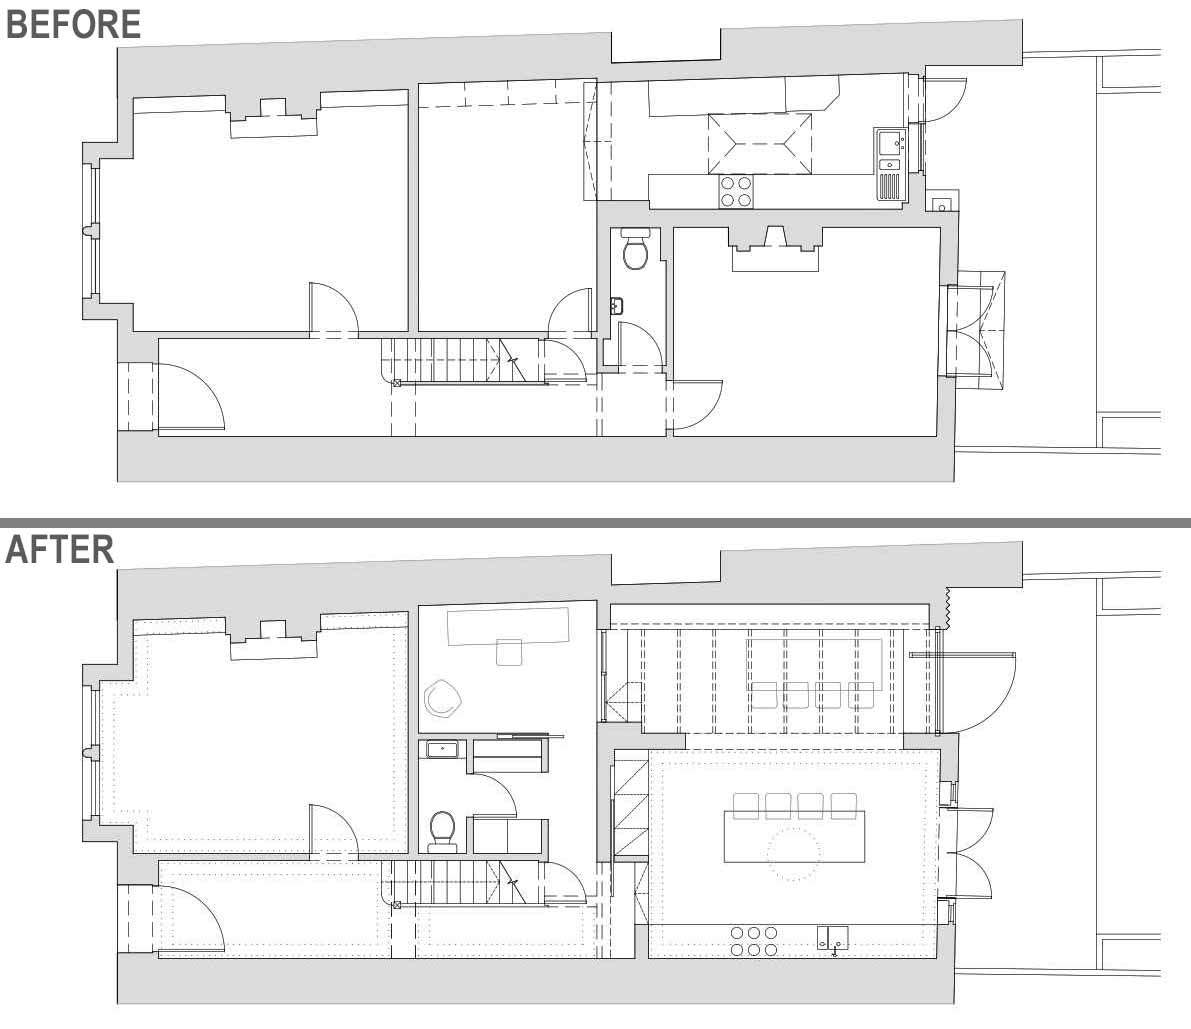 The floor plan of a remodeled side extension for a home in London.